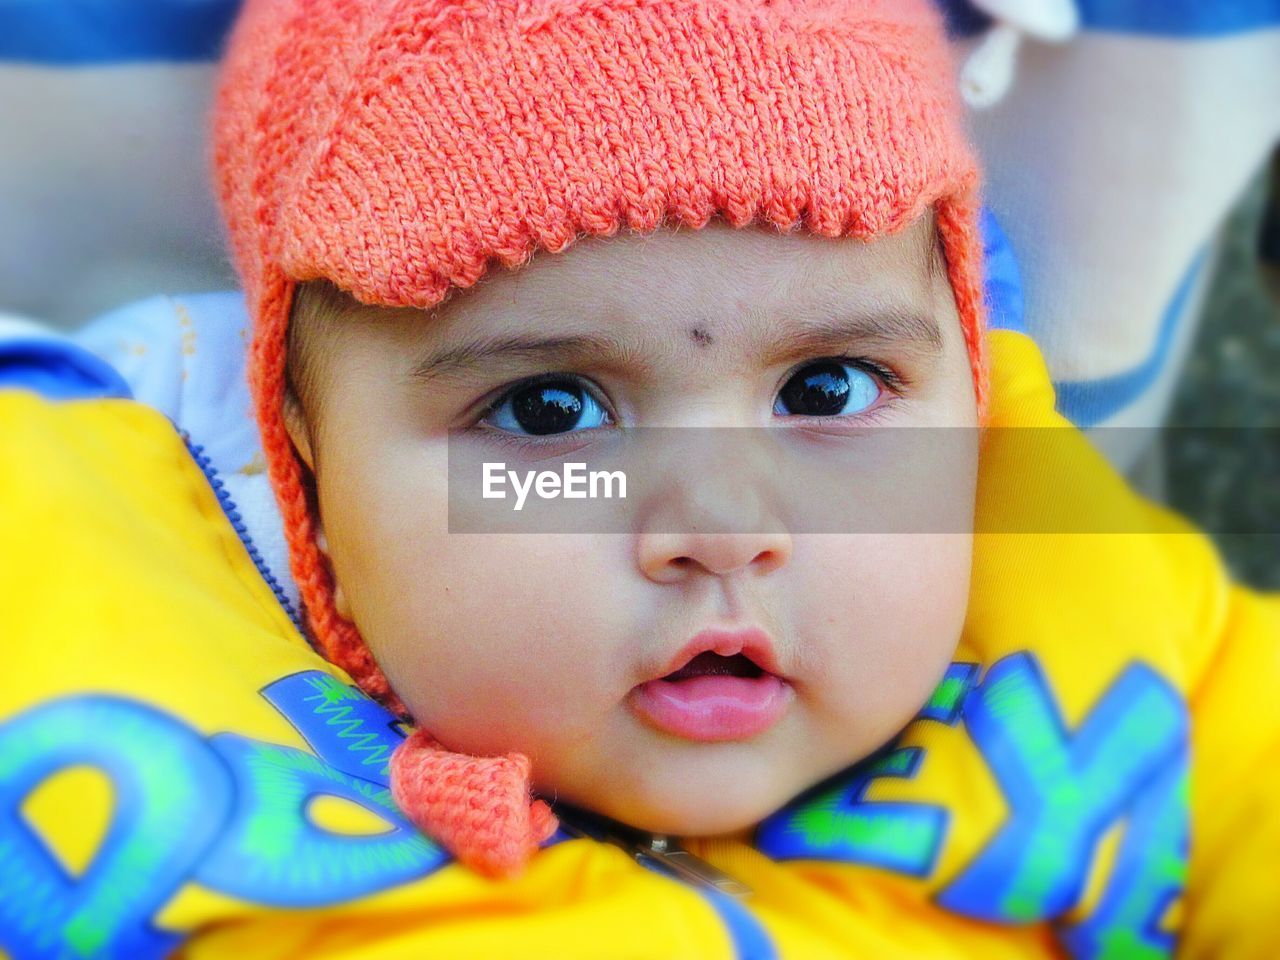 Close-up portrait of cute baby girl wearing knit hat